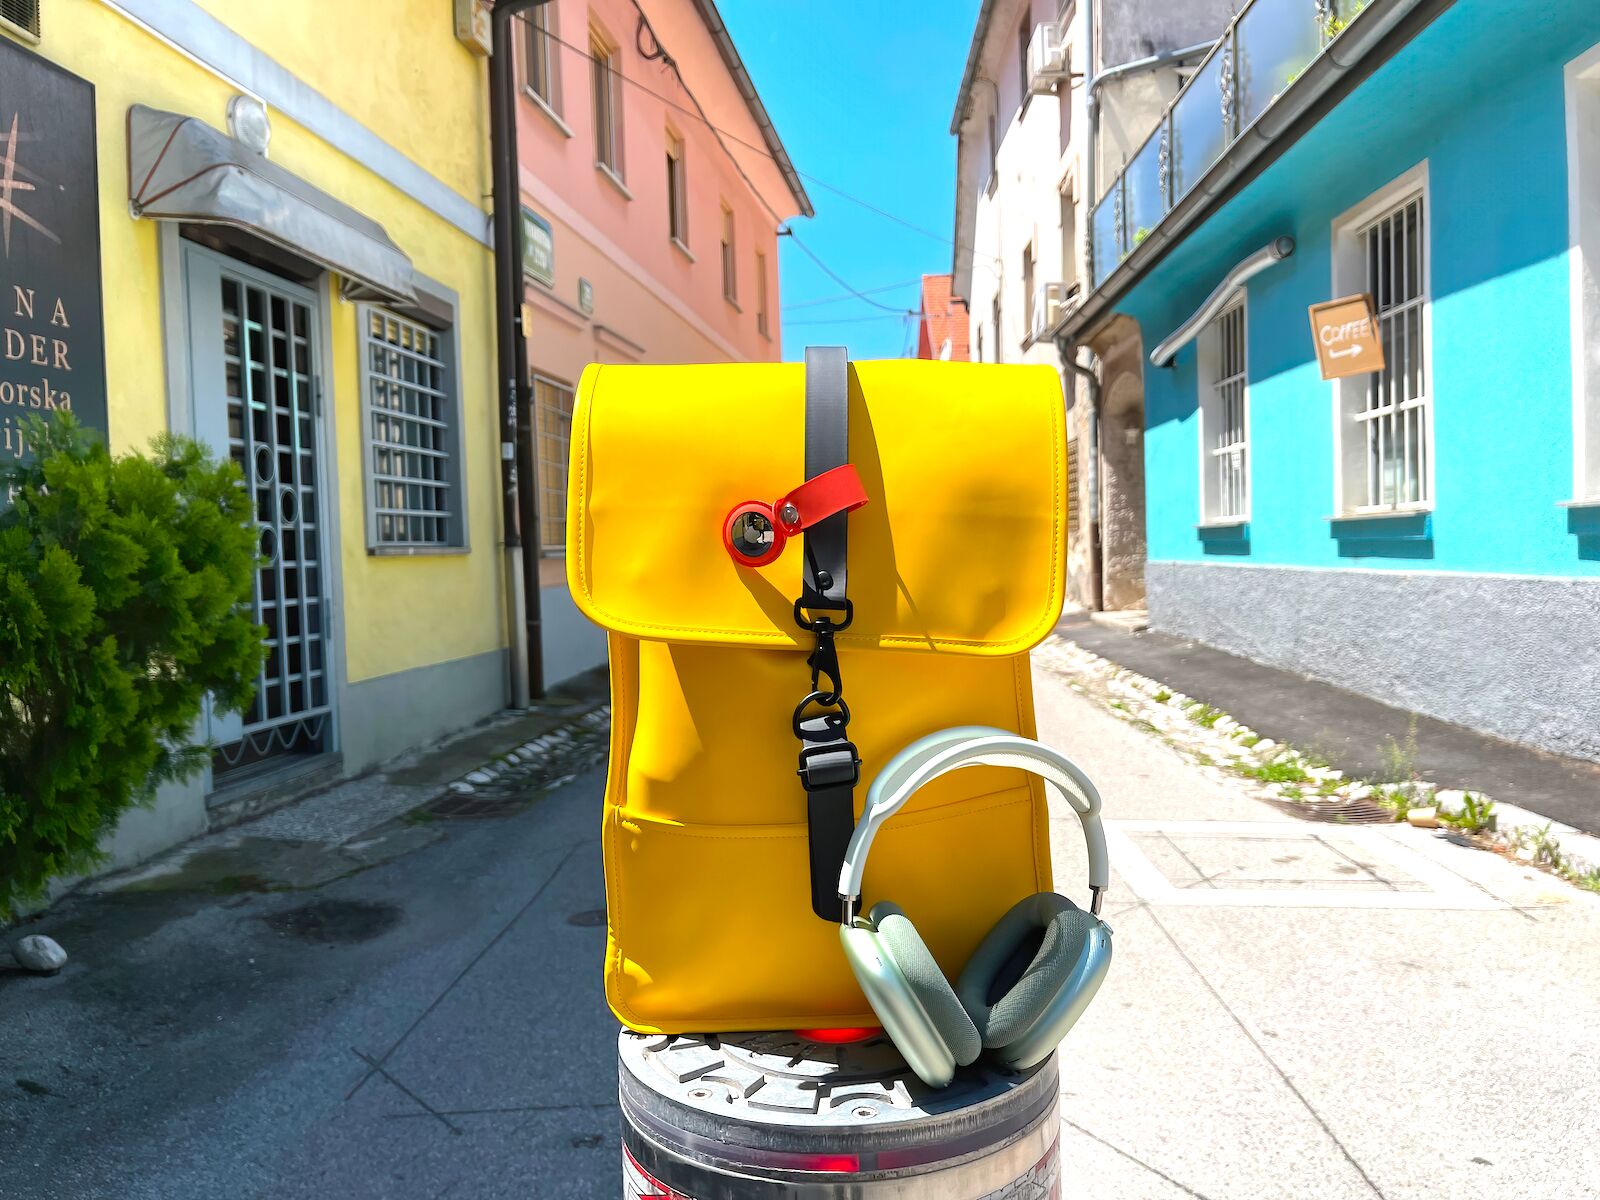 Yellow bag with an AirTag attached to it. AirTags should be an essential part of any frequent traveler's kit